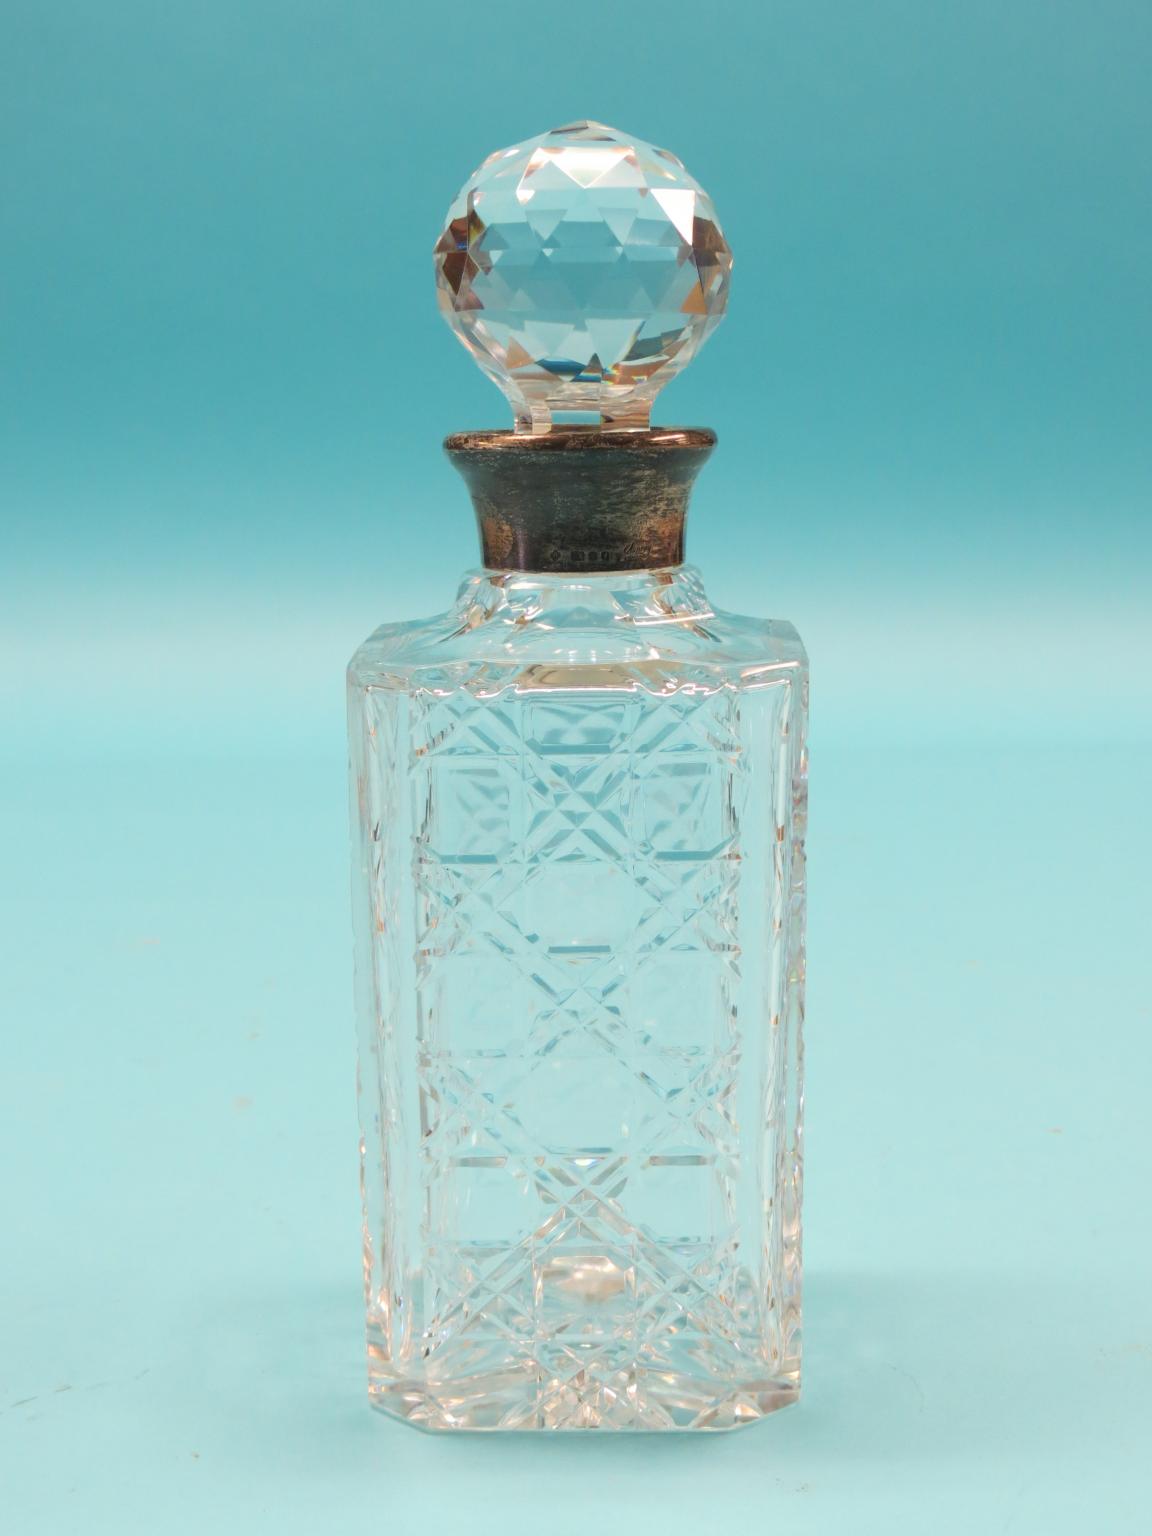 An Asprey silver-mounted glass spirit decanter, hobnail-cut body with stopper, London 1983, 10.5in. - Image 2 of 2